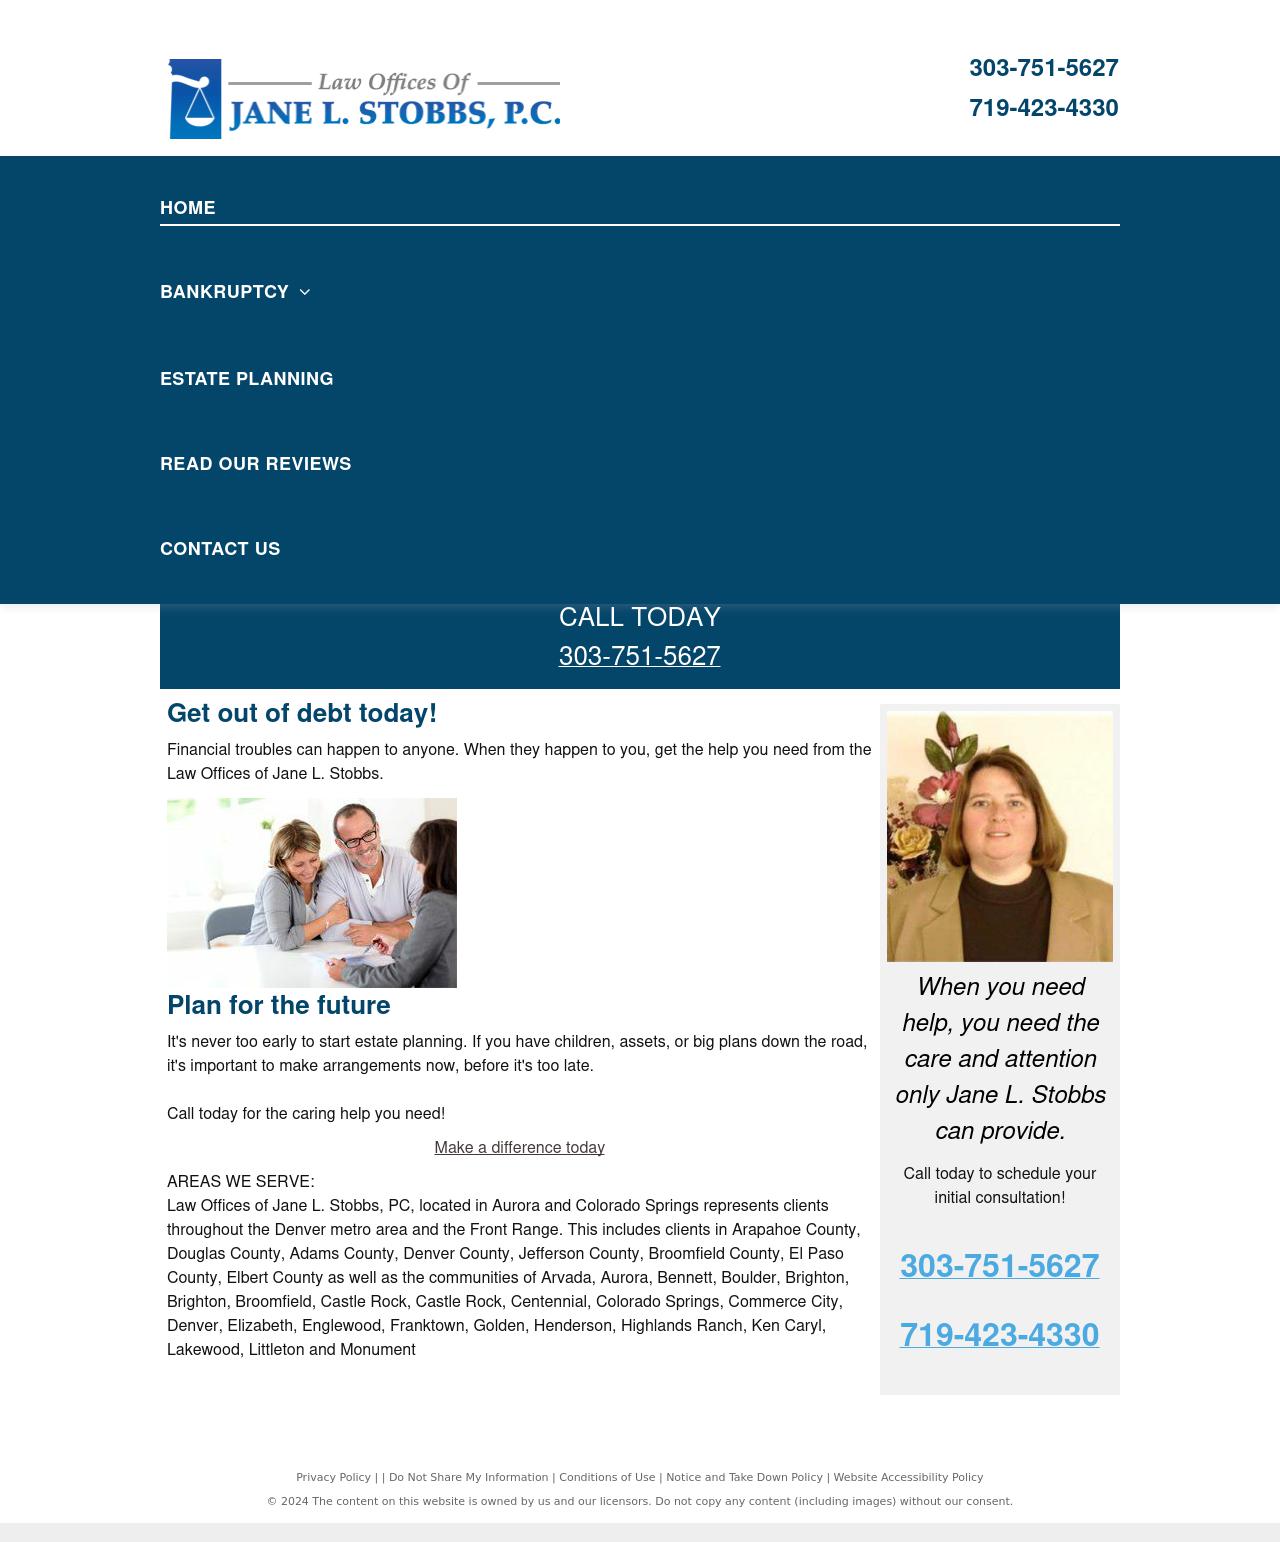 Stobbs Law Offices, PC - Aurora CO Lawyers